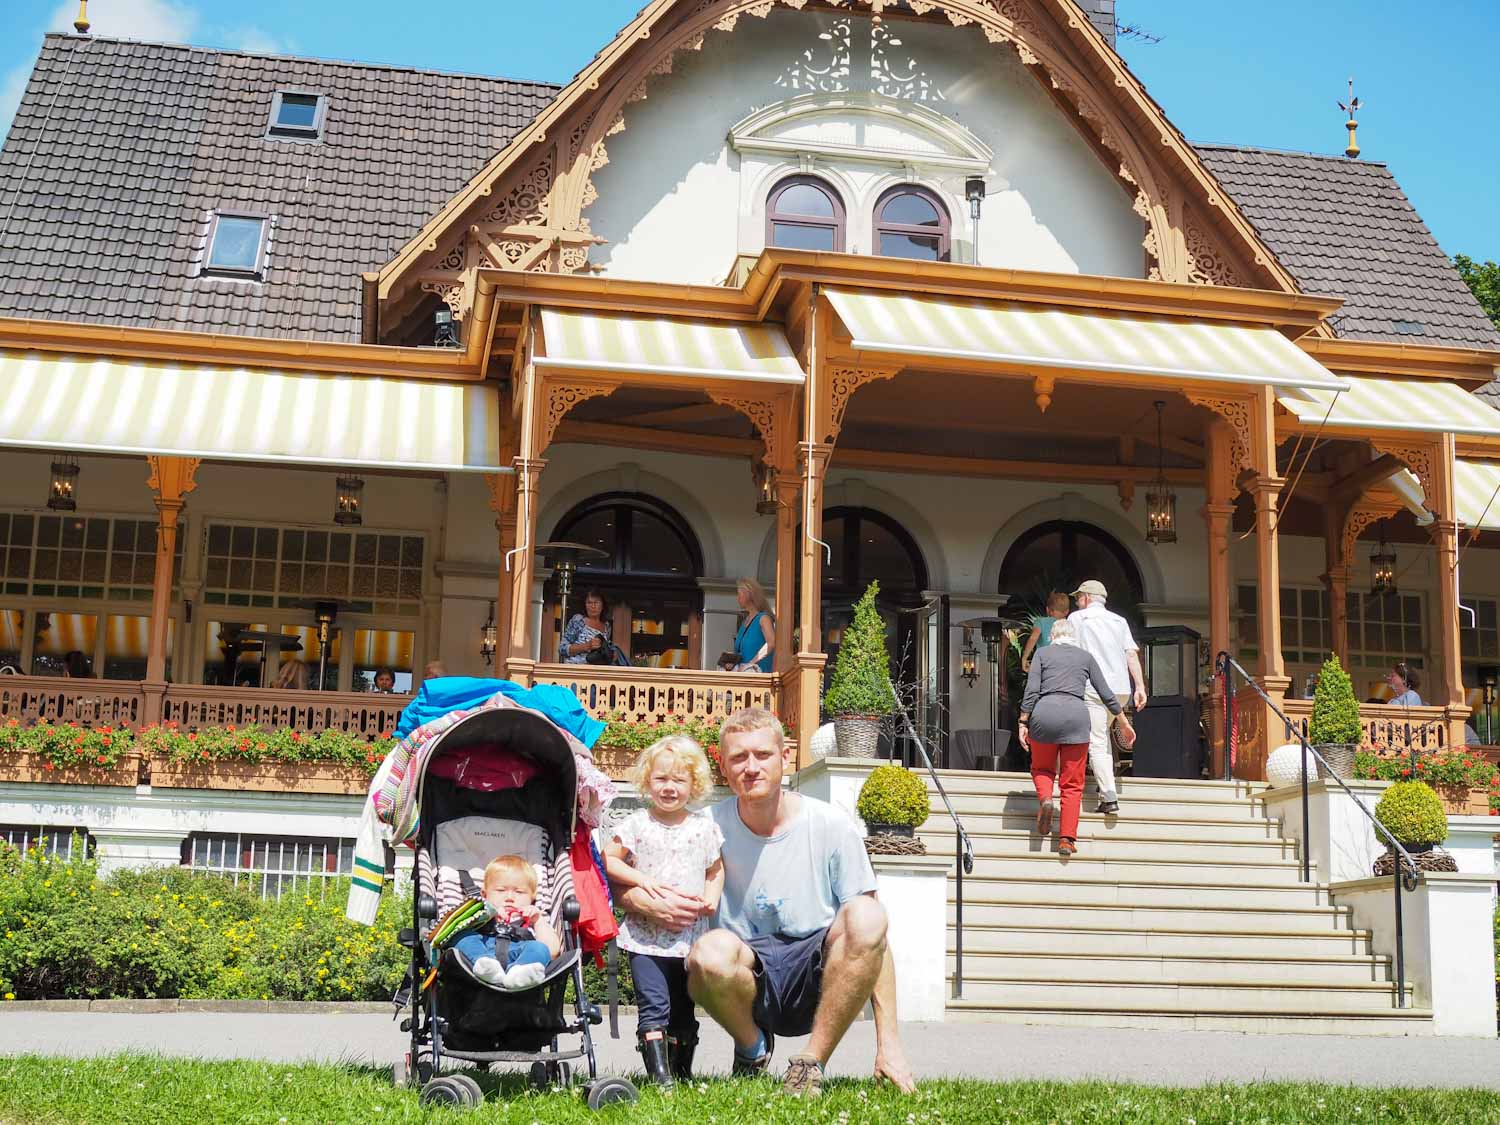 Family with pushchair in front of a decorative wooden building